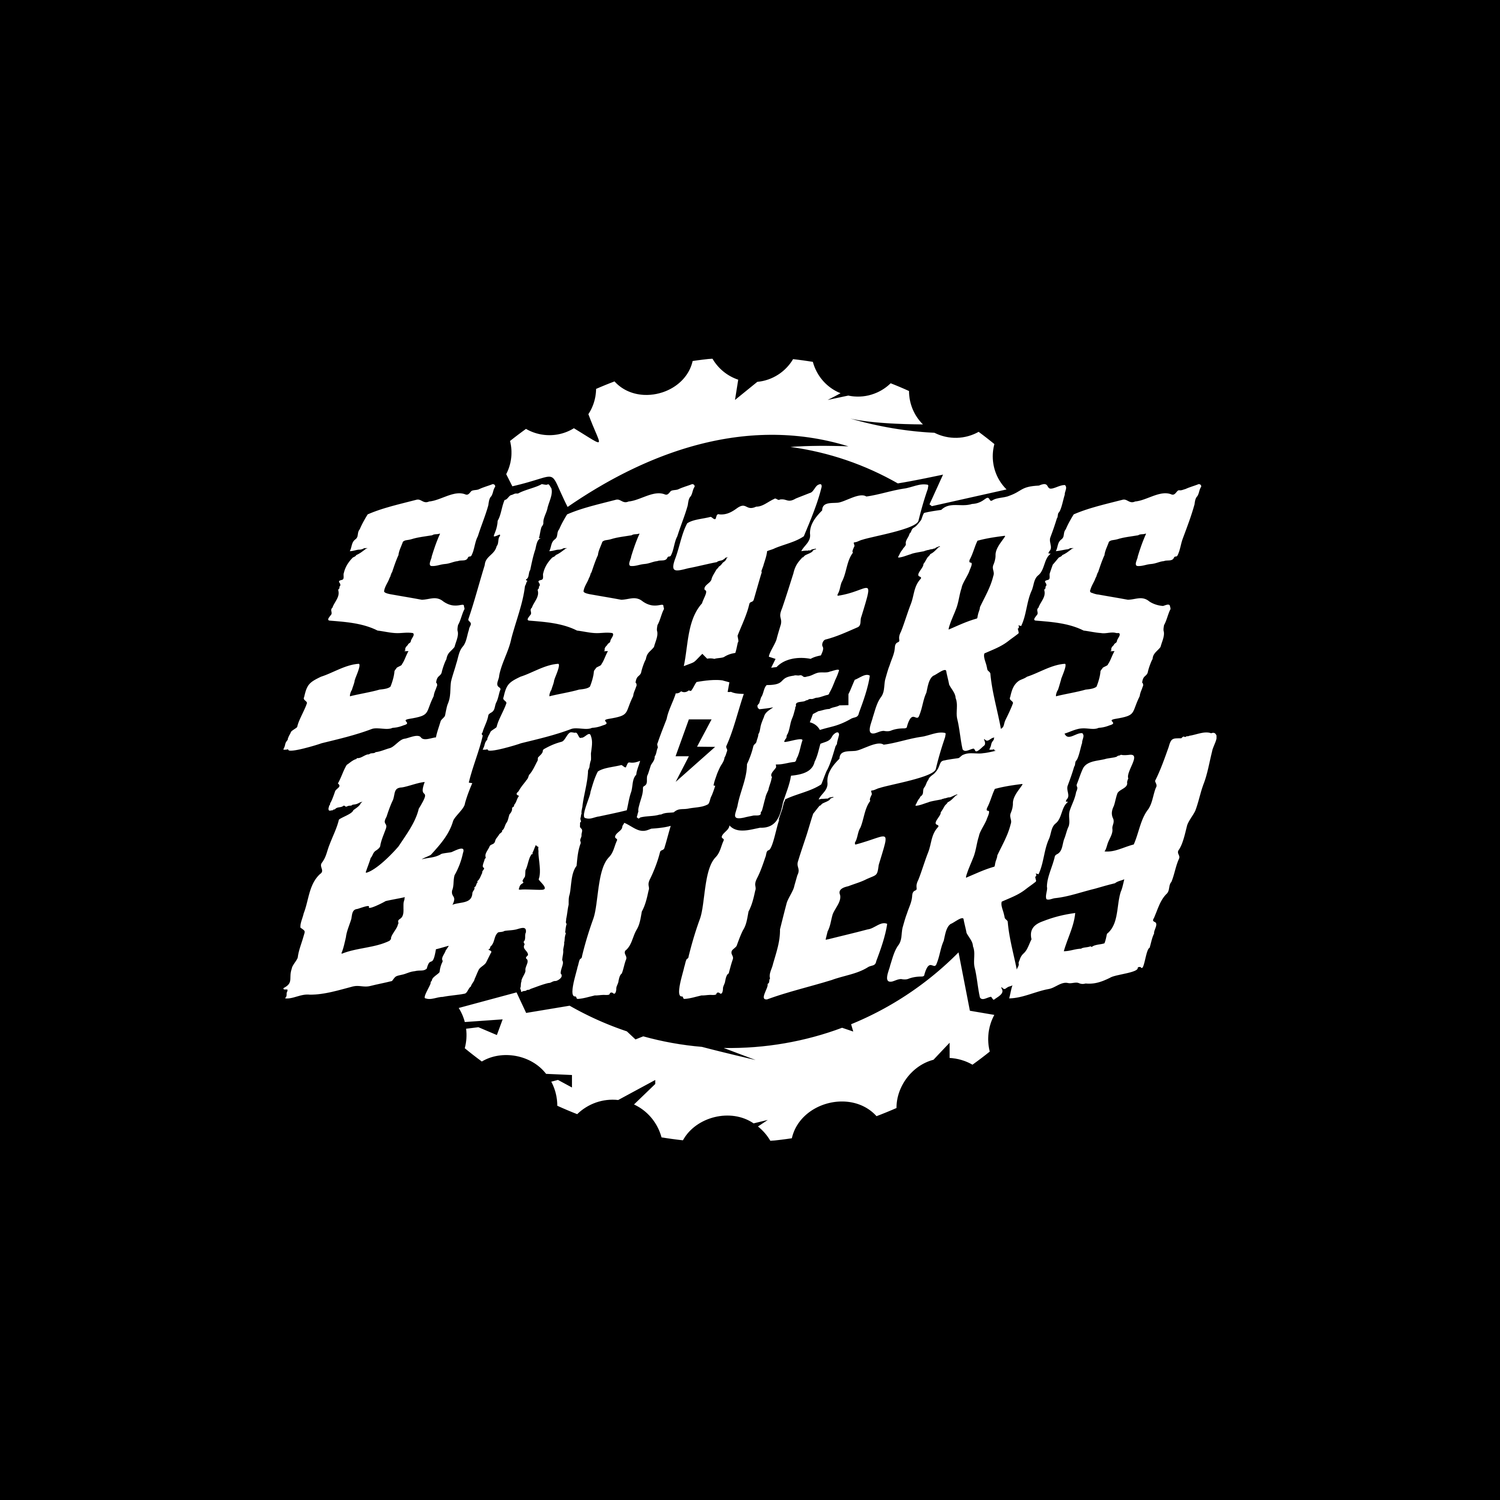 Sisters of Battery